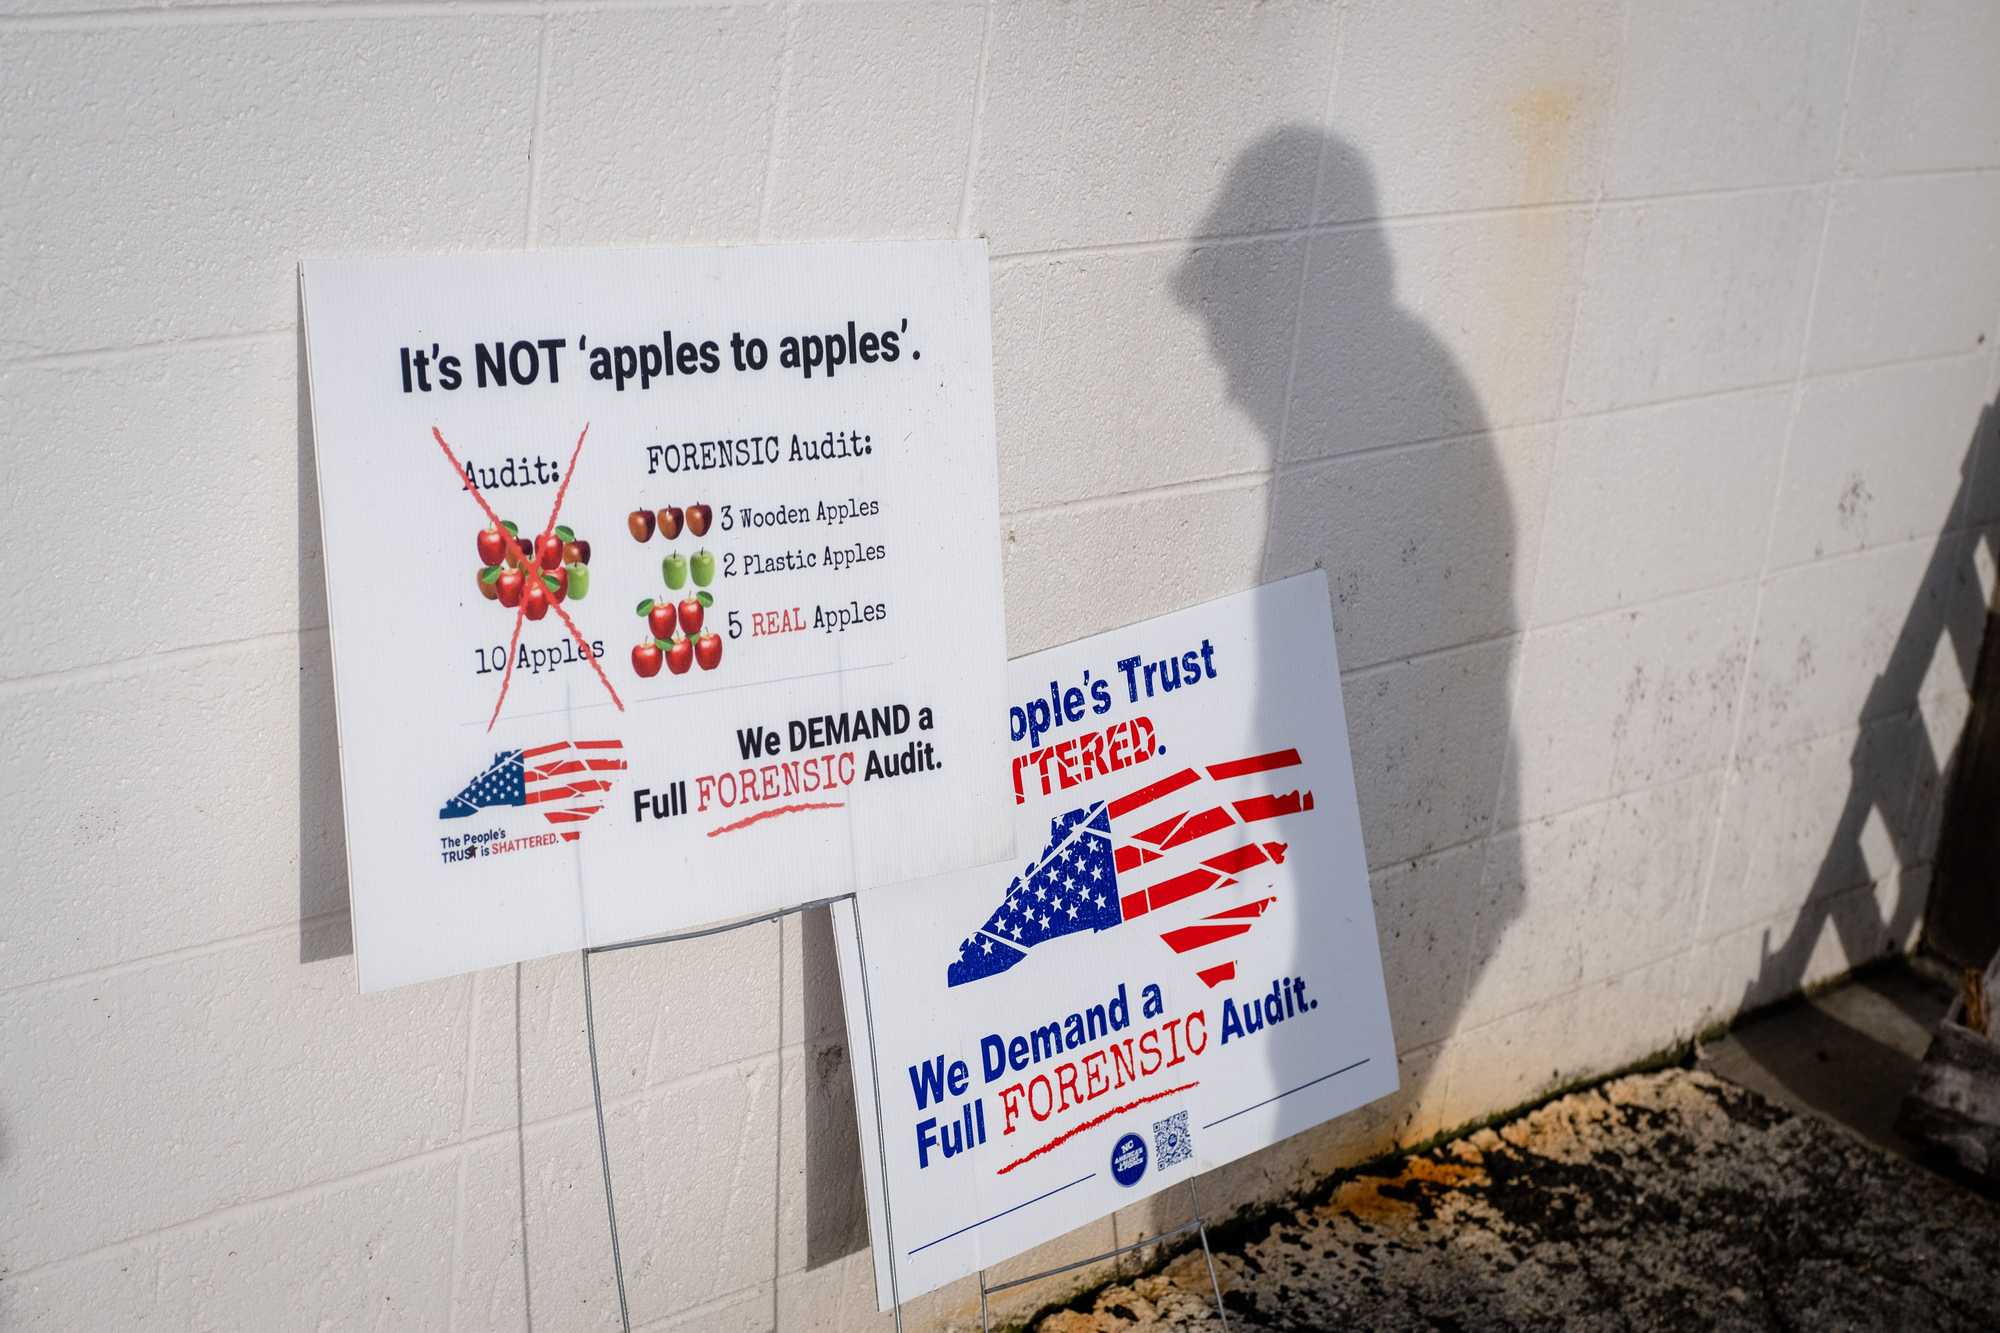 Signs promoting election lies about the 2020 presidential election left behind the Surry County Board of Elections in Dobson, N.C.